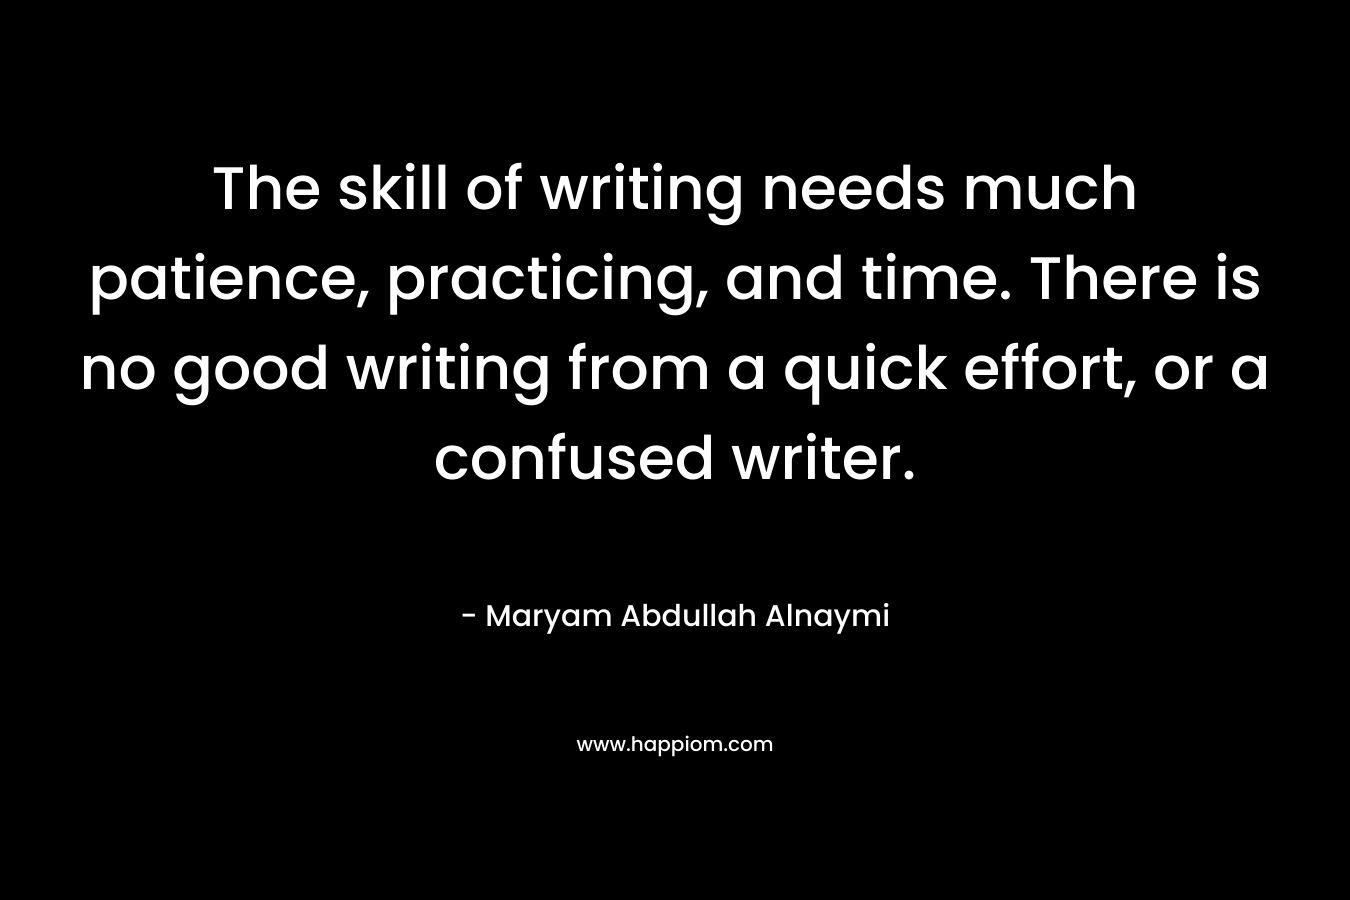 The skill of writing needs much patience, practicing, and time. There is no good writing from a quick effort, or a confused writer. – Maryam Abdullah Alnaymi